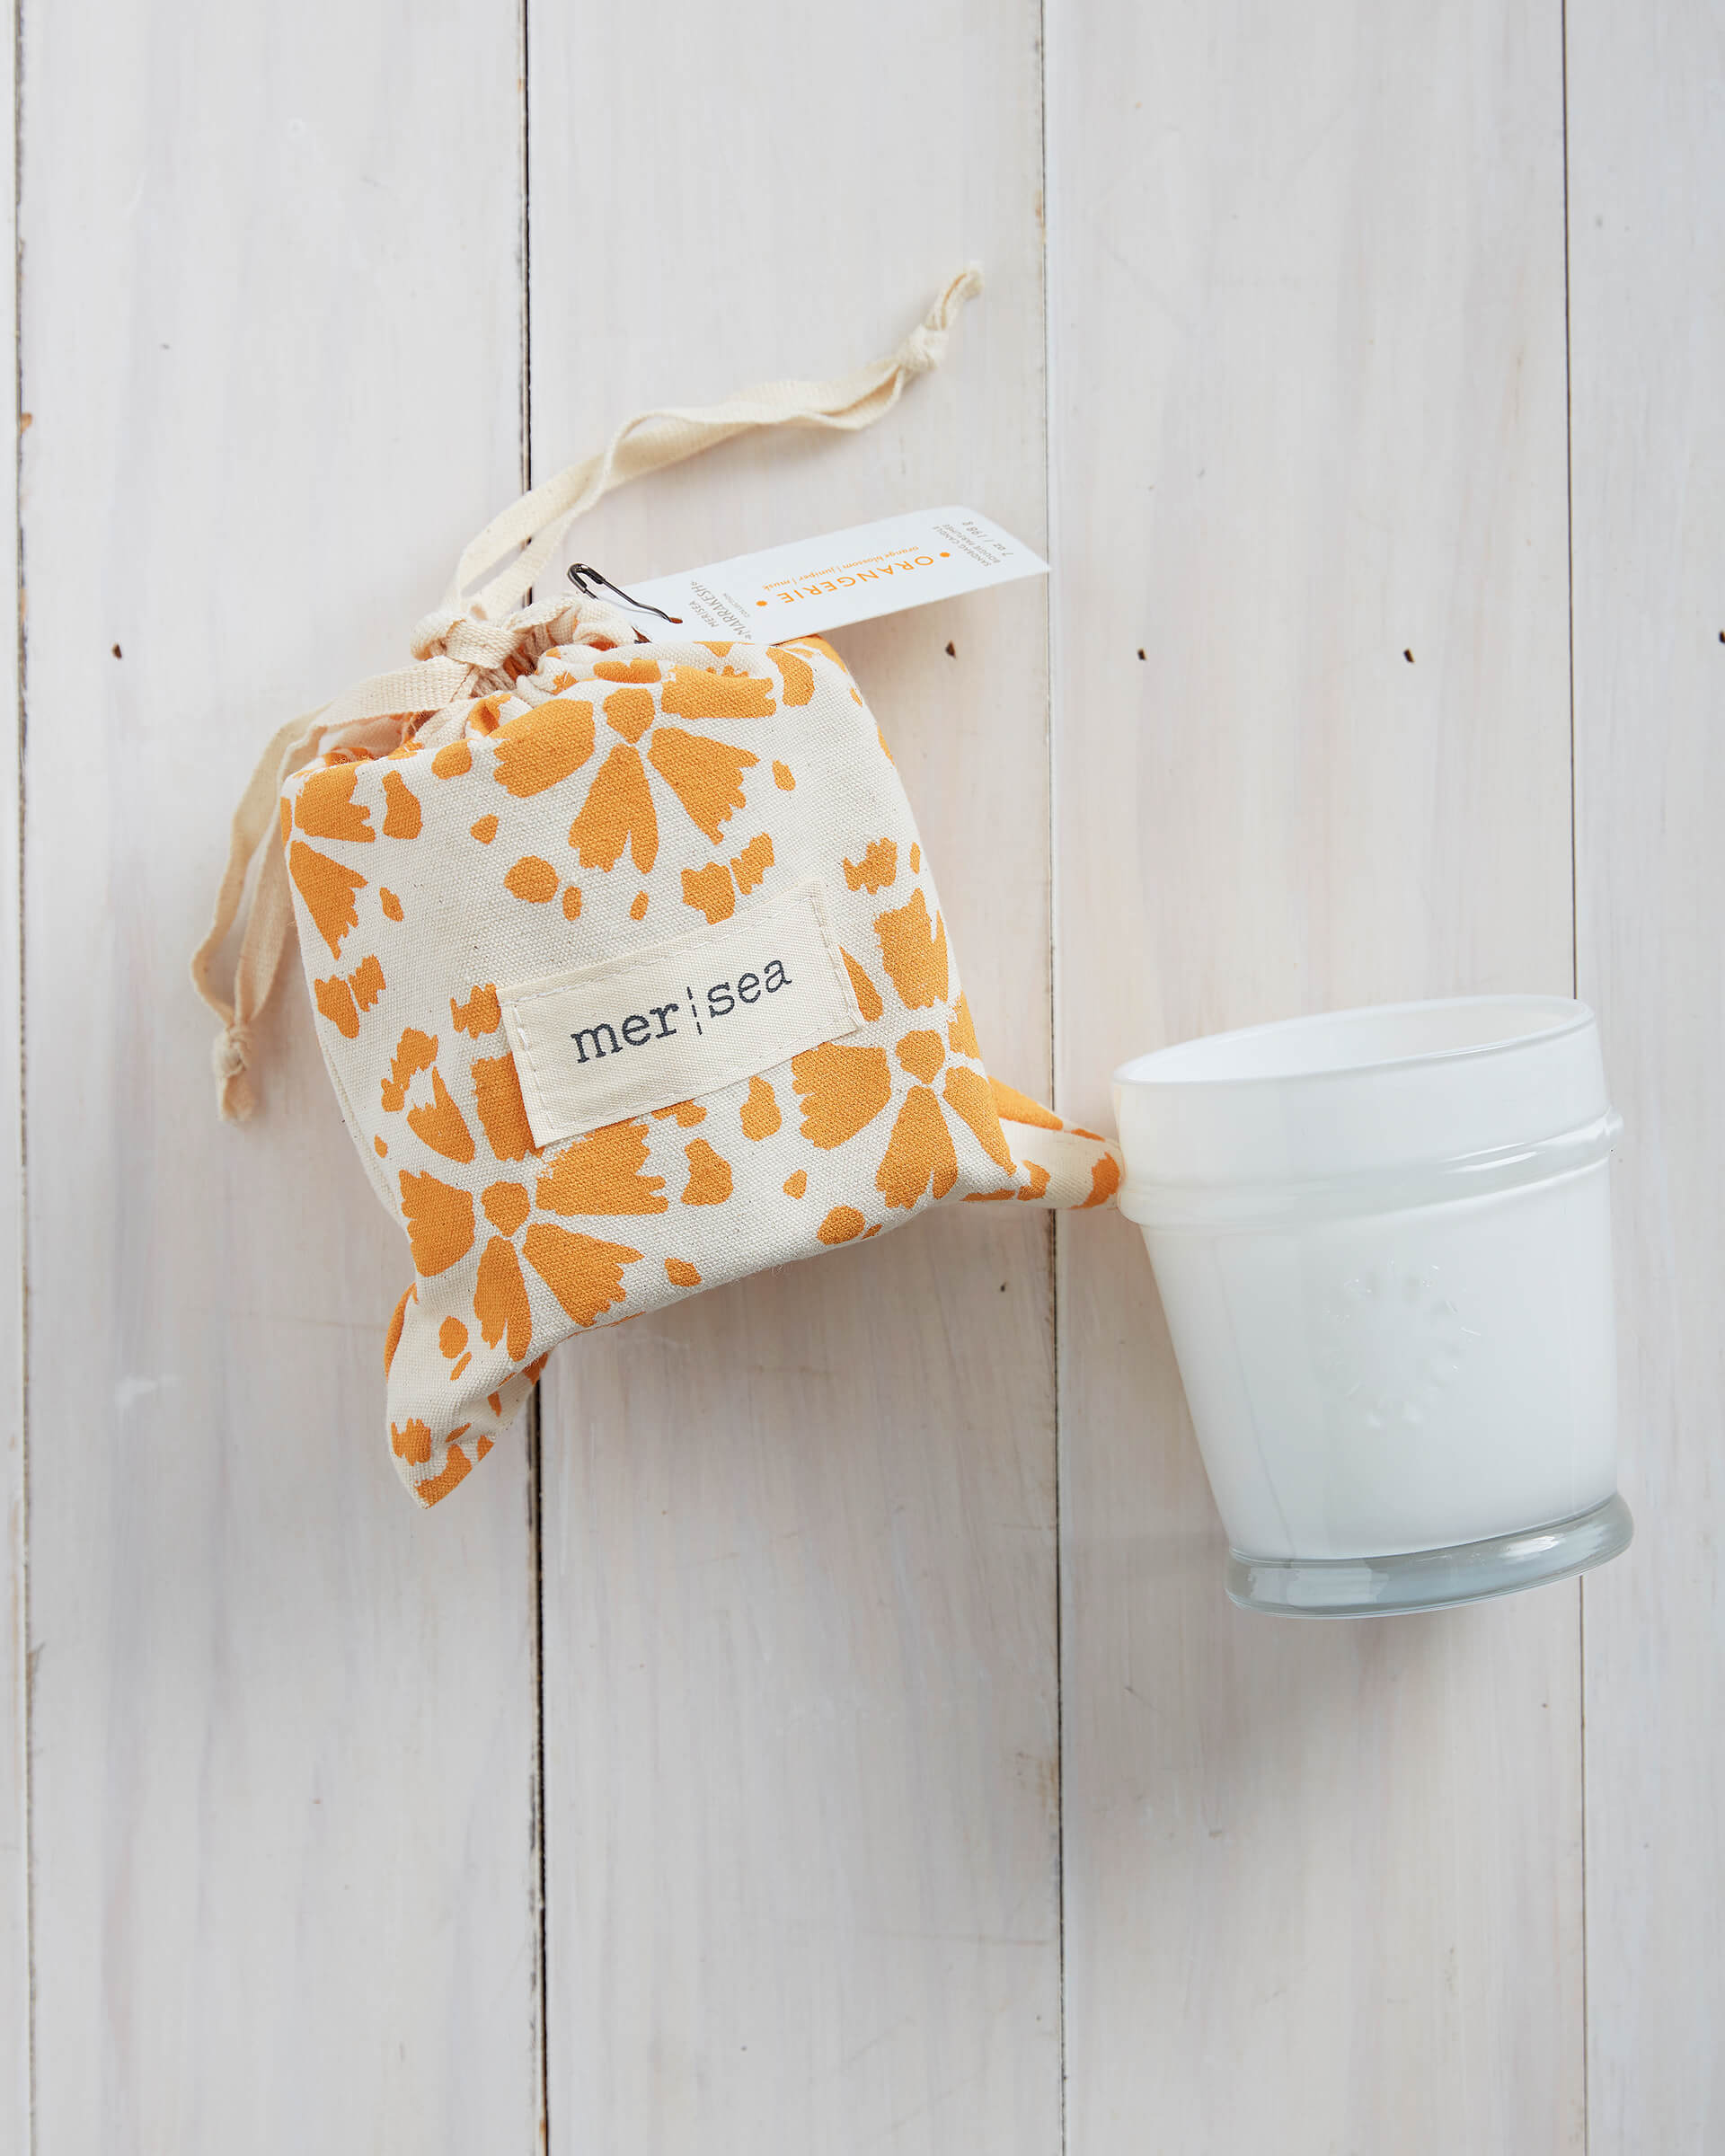 7 oz orange orangerie canister candle with the lid open on a white background 